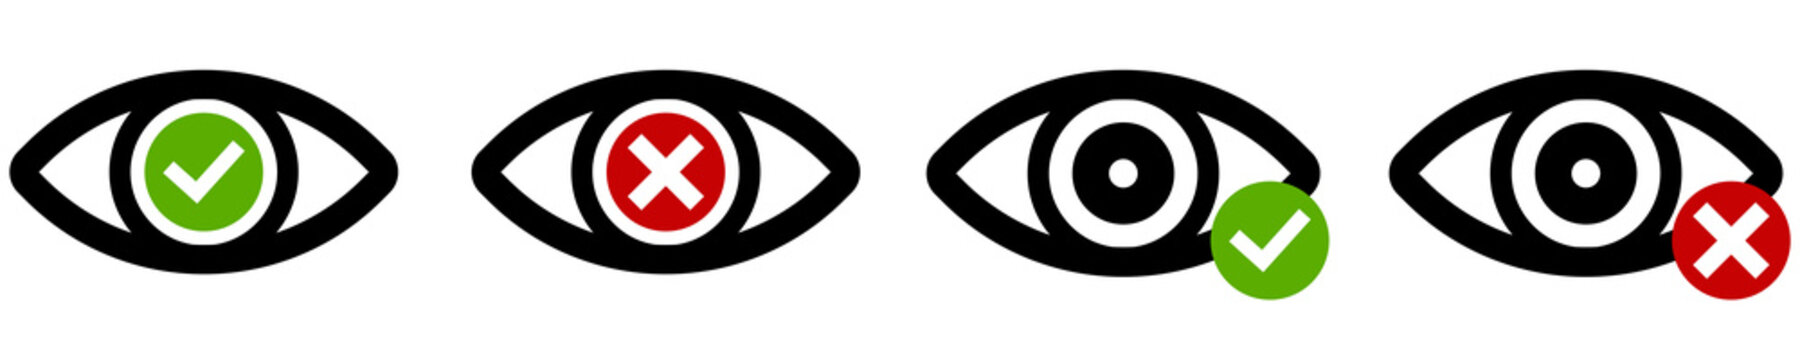 Show password icon, eye symbol. Vector vision hide from clock icon. Vector illustration eps10